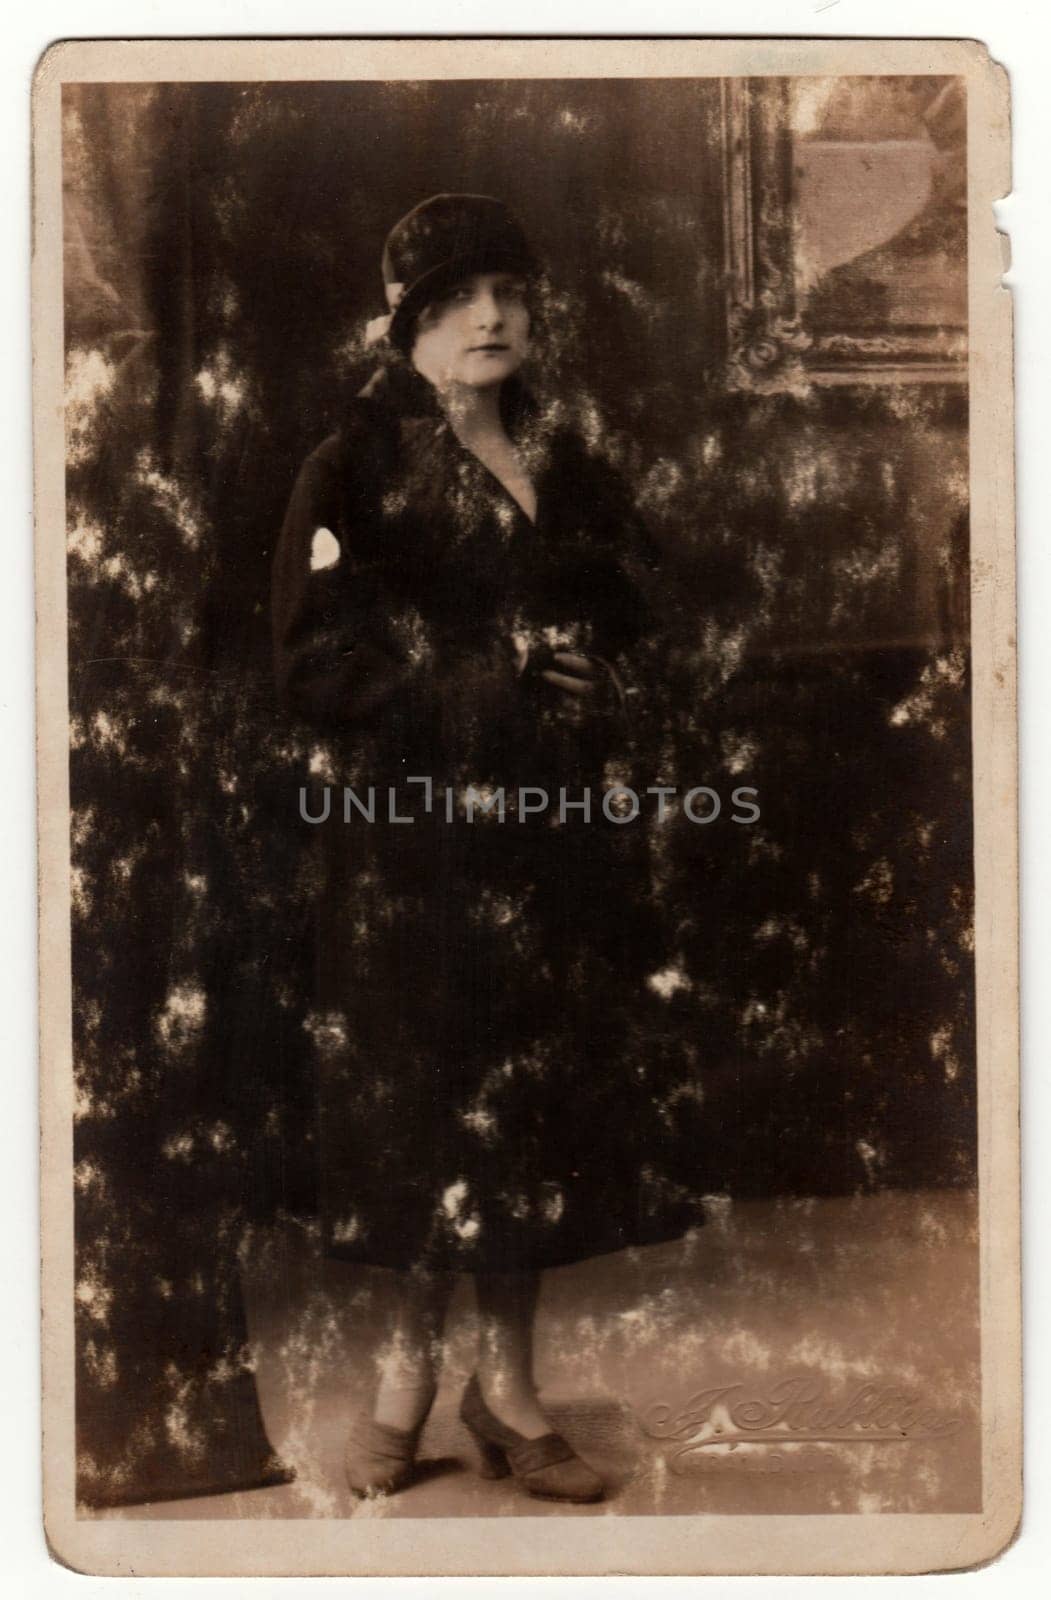 KRALUV DVUR, THE CZECHOSLOVAK REPUBLIC - CIRCA 1930s: Vintage photo shows woman pose in a photography studio. Original retro black and white photography. With original film grain, blur and scratches.